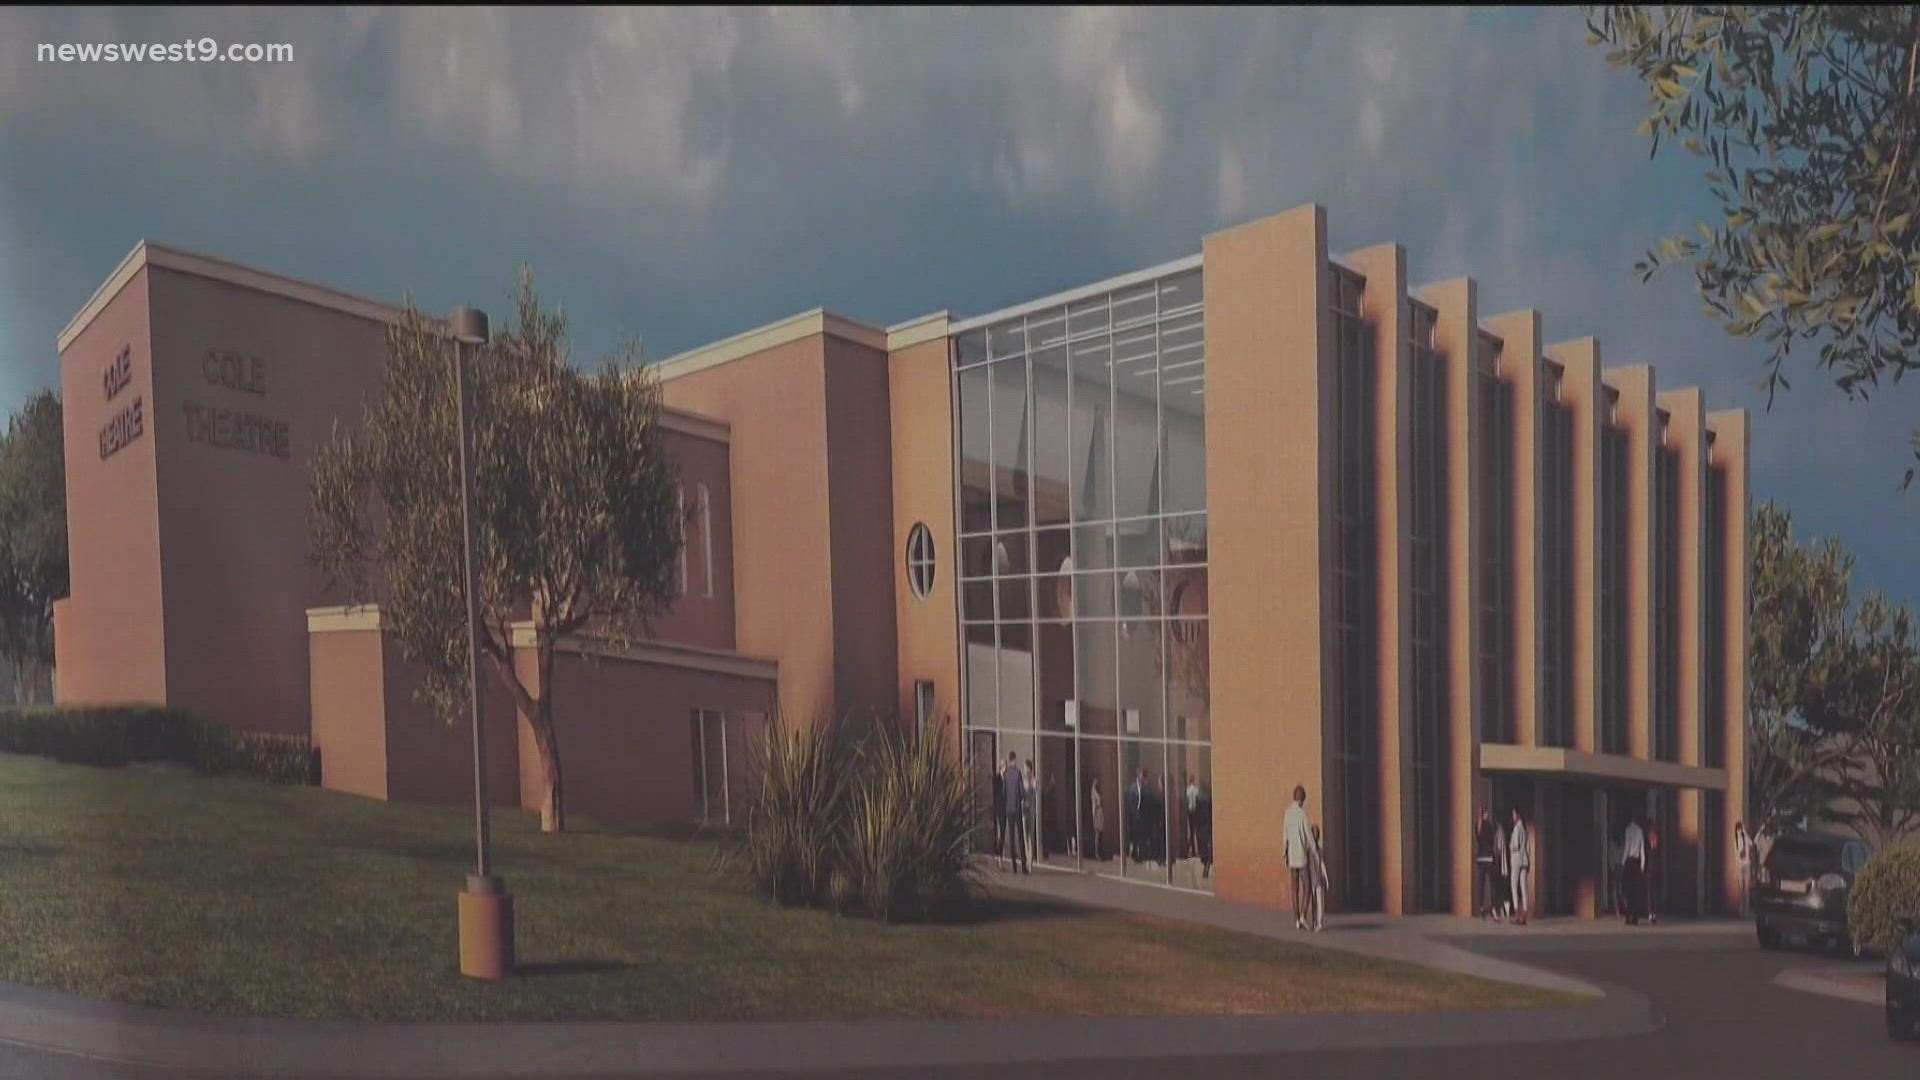 The new plan include a larger lobby space and increase the classroom area.